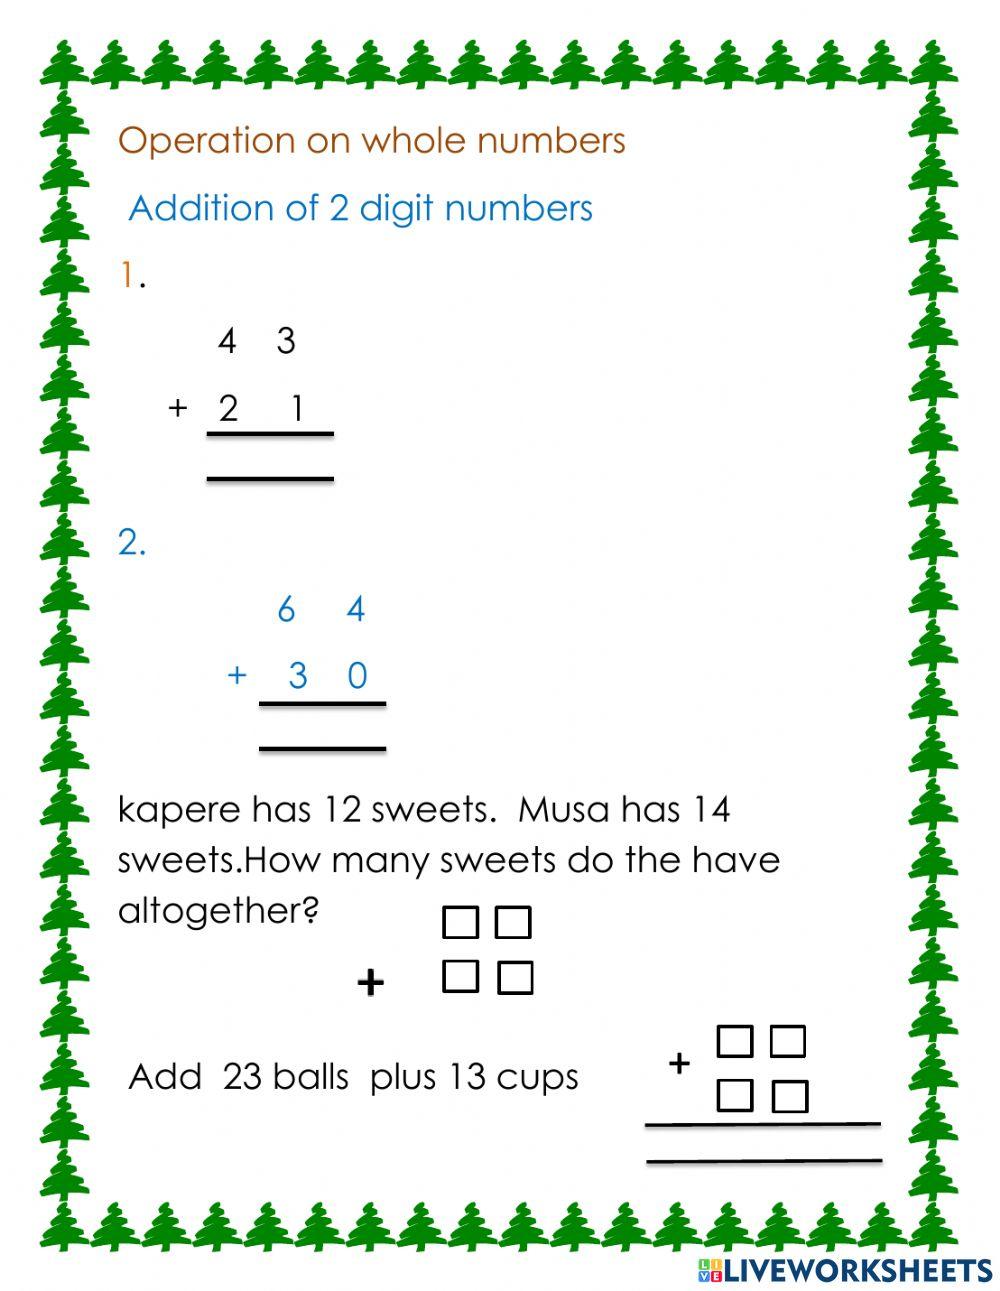 Addition of 2 digit numbers